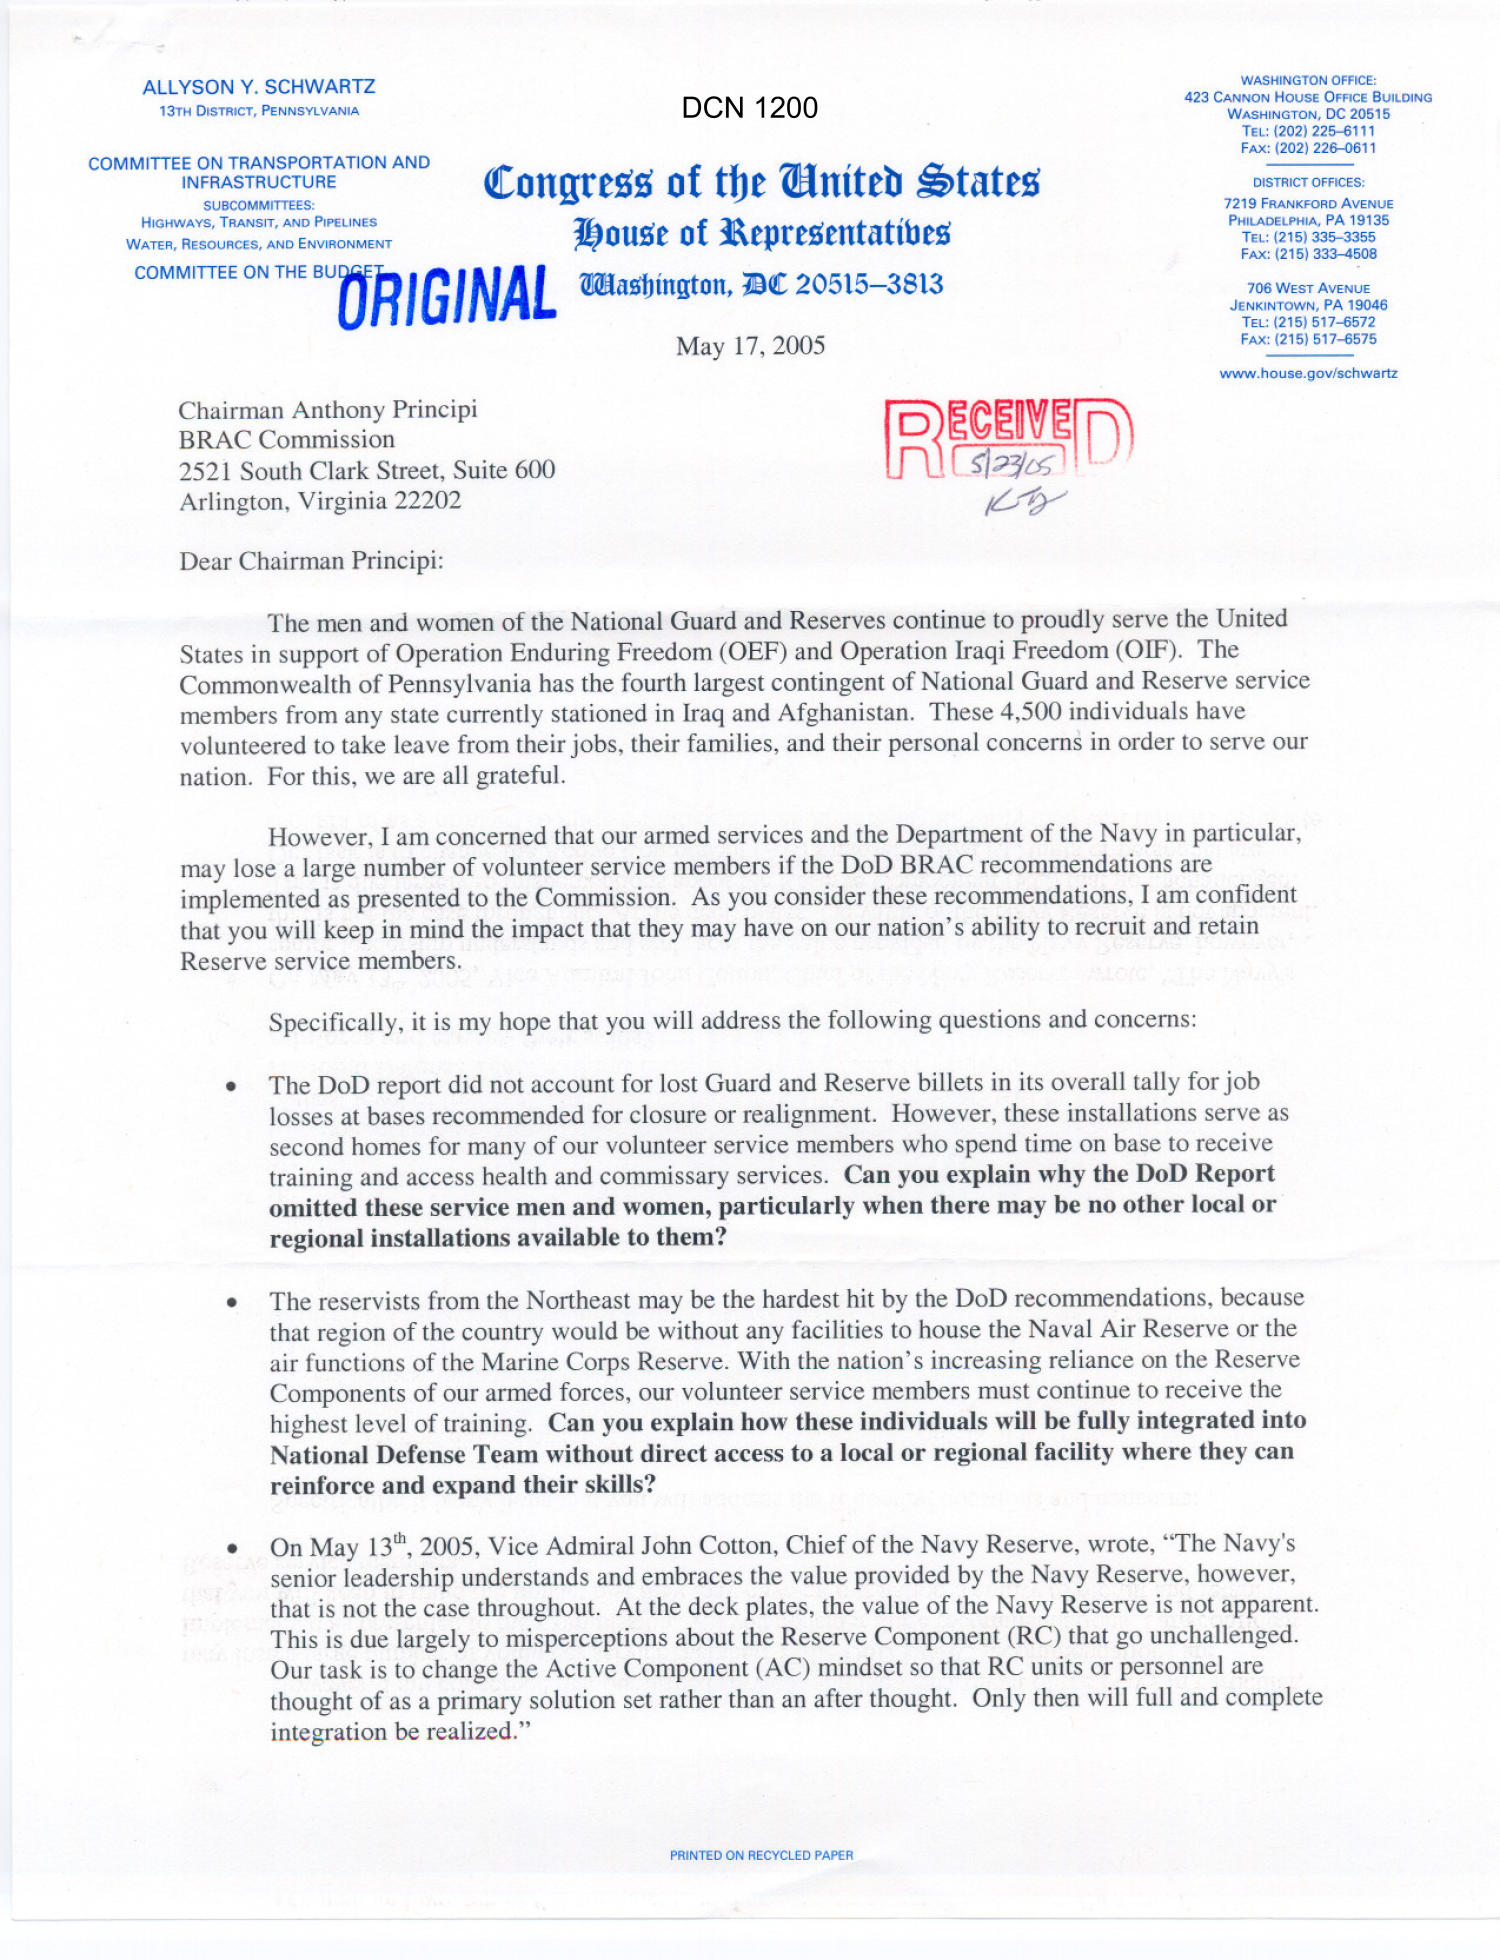 Letter from Schwarz, C.Y., to Chairman Principi (05/17/2005)
                                                
                                                    [Sequence #]: 1 of 2
                                                